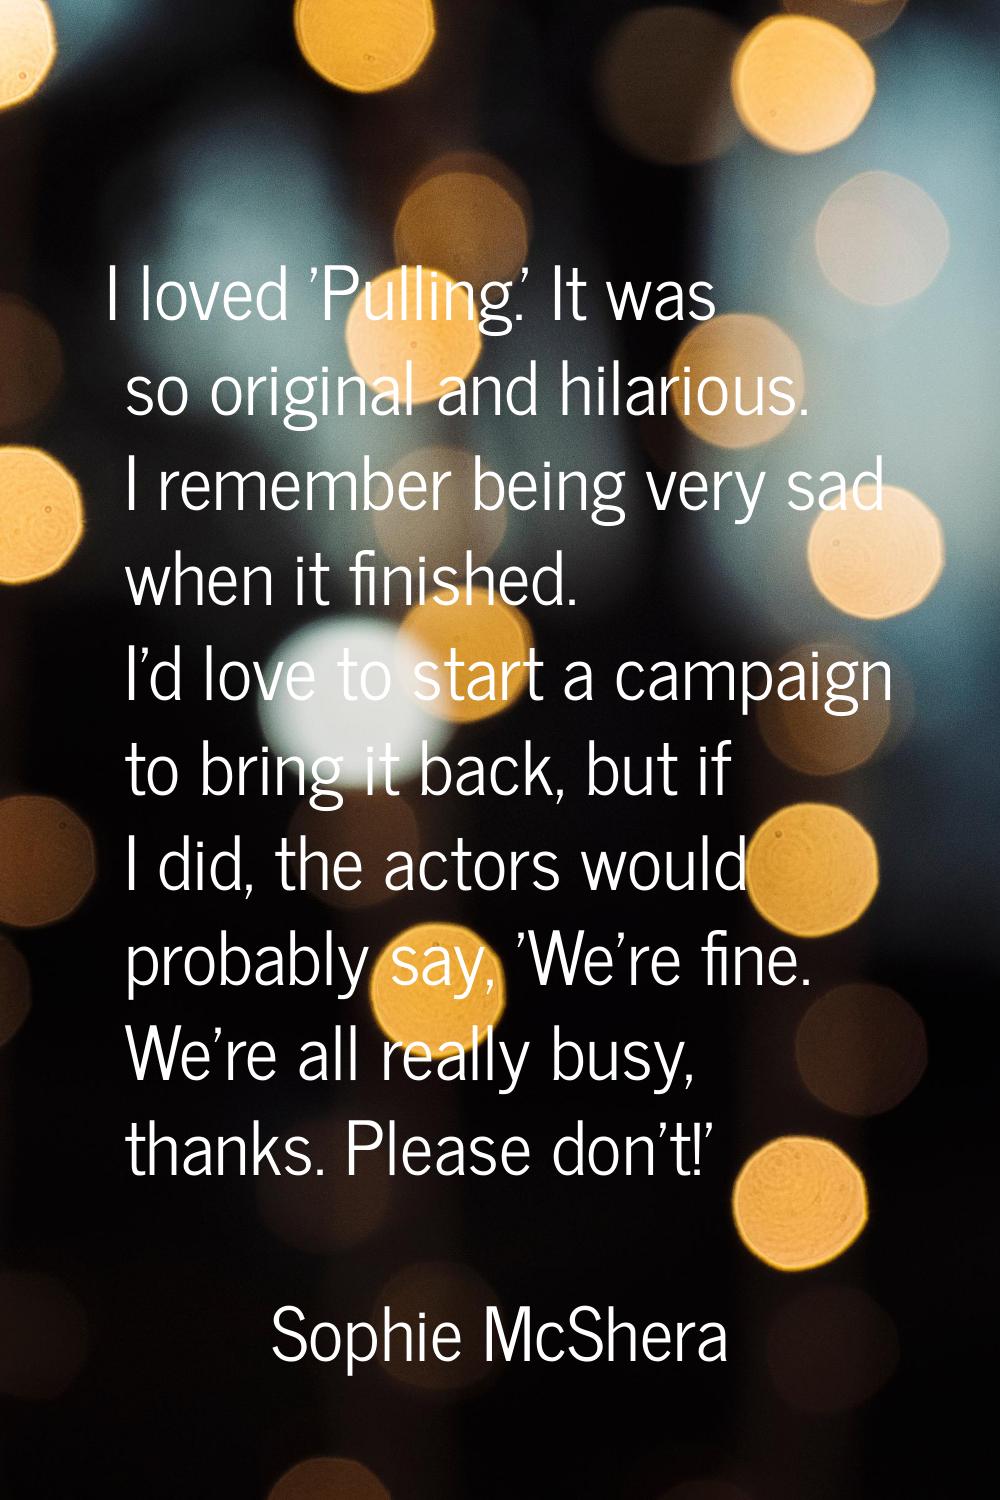 I loved 'Pulling.' It was so original and hilarious. I remember being very sad when it finished. I'